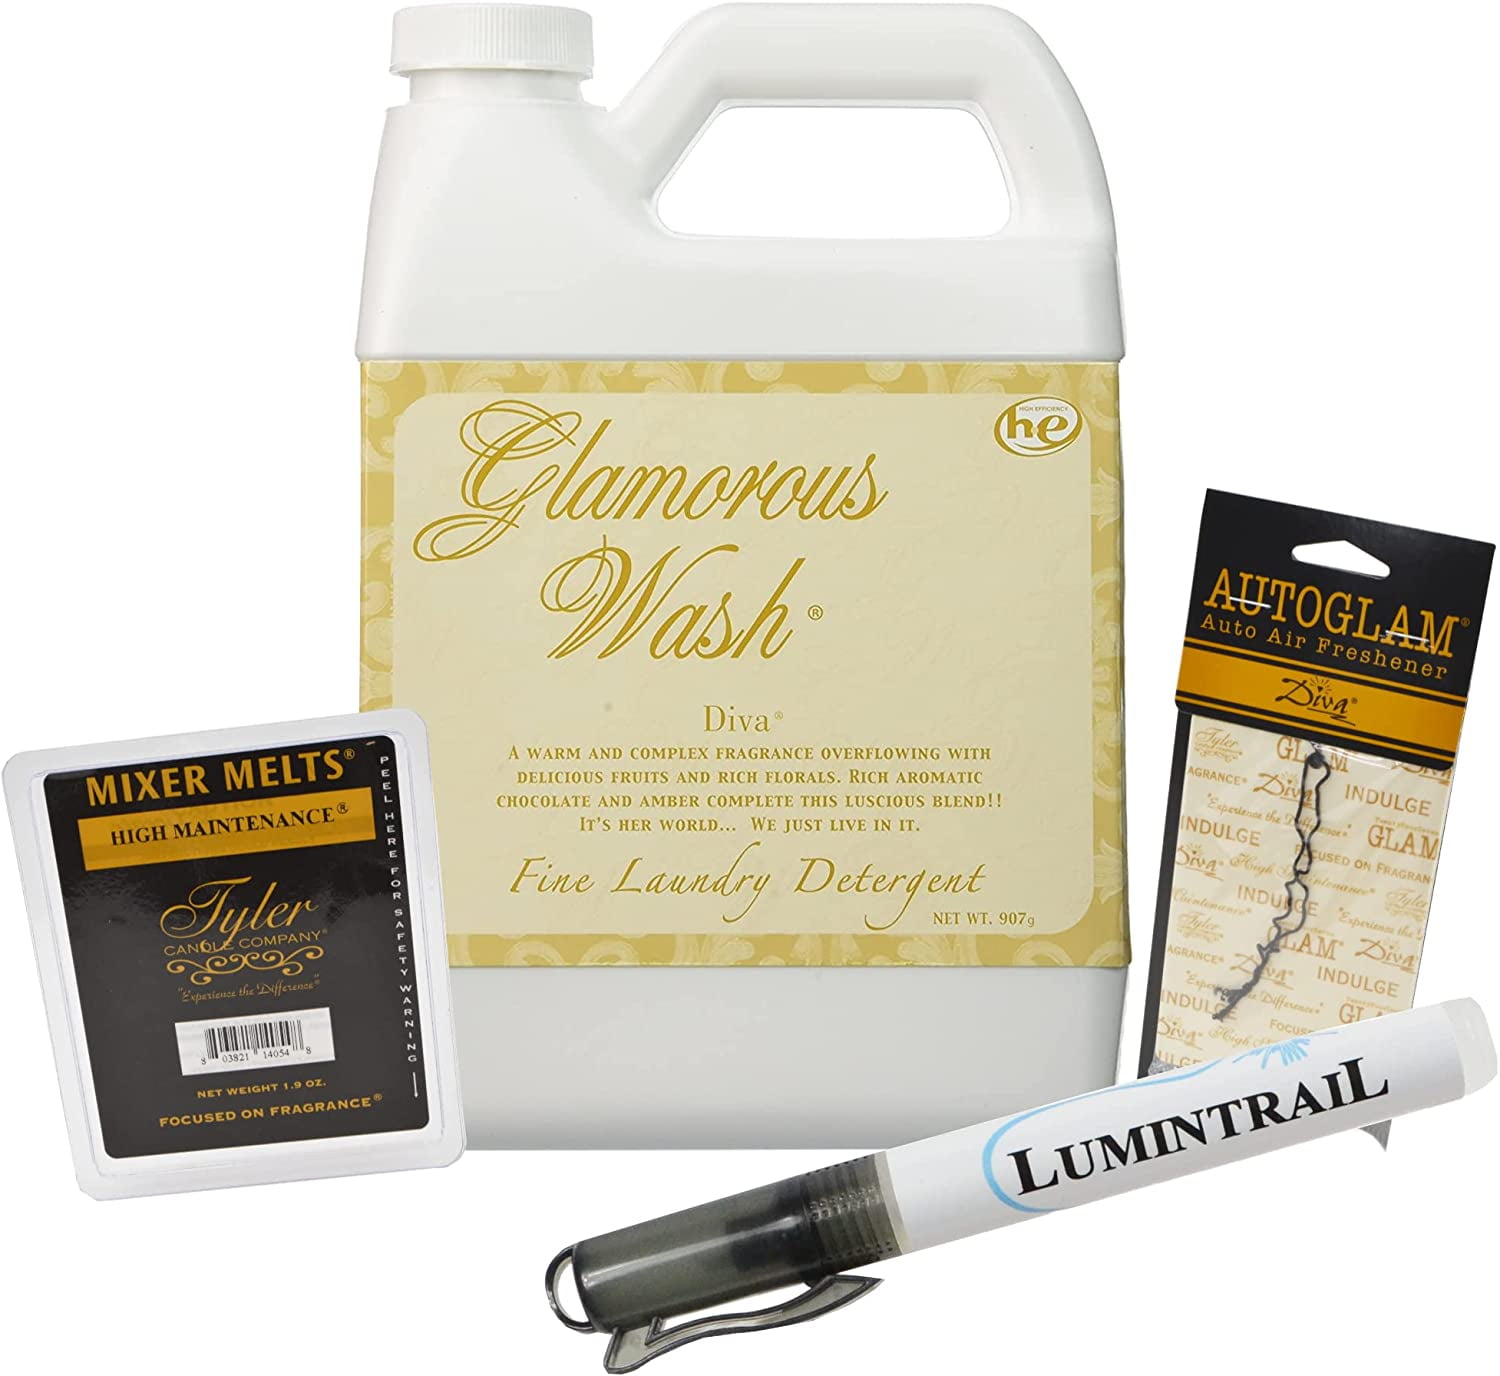 Tyler Candle Company ~ Glamorous Wash ~ Diva Glamorous Wash, Price $89.95  in Tupelo, MS from Elizabeth Clair's